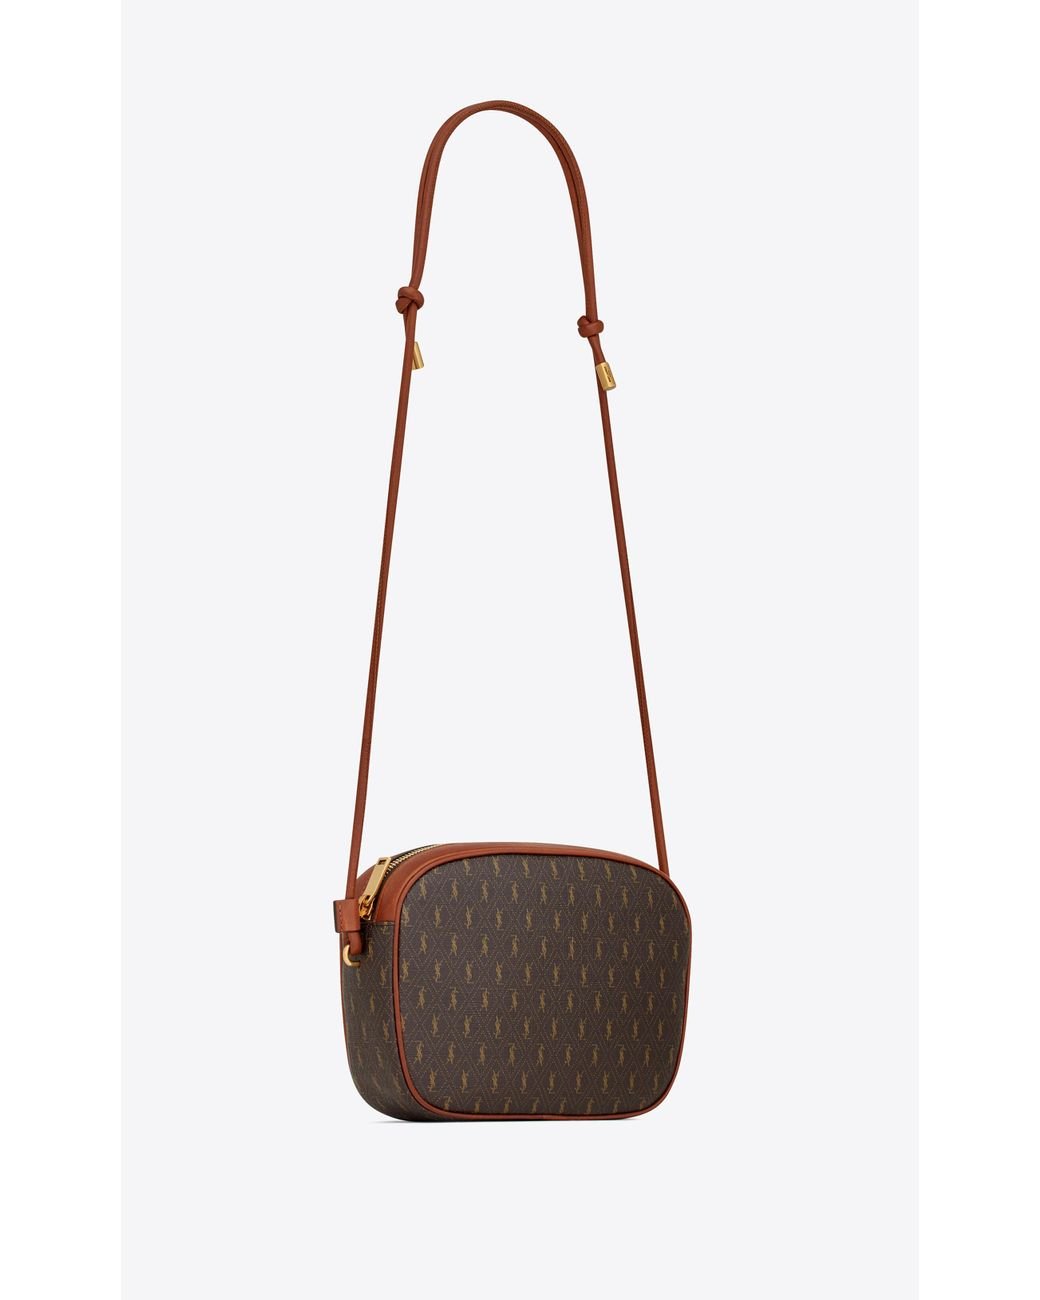 Saint Laurent Le Monogramme Small Camera Bag In Monogram Canvas And Smooth  Leather in Brown